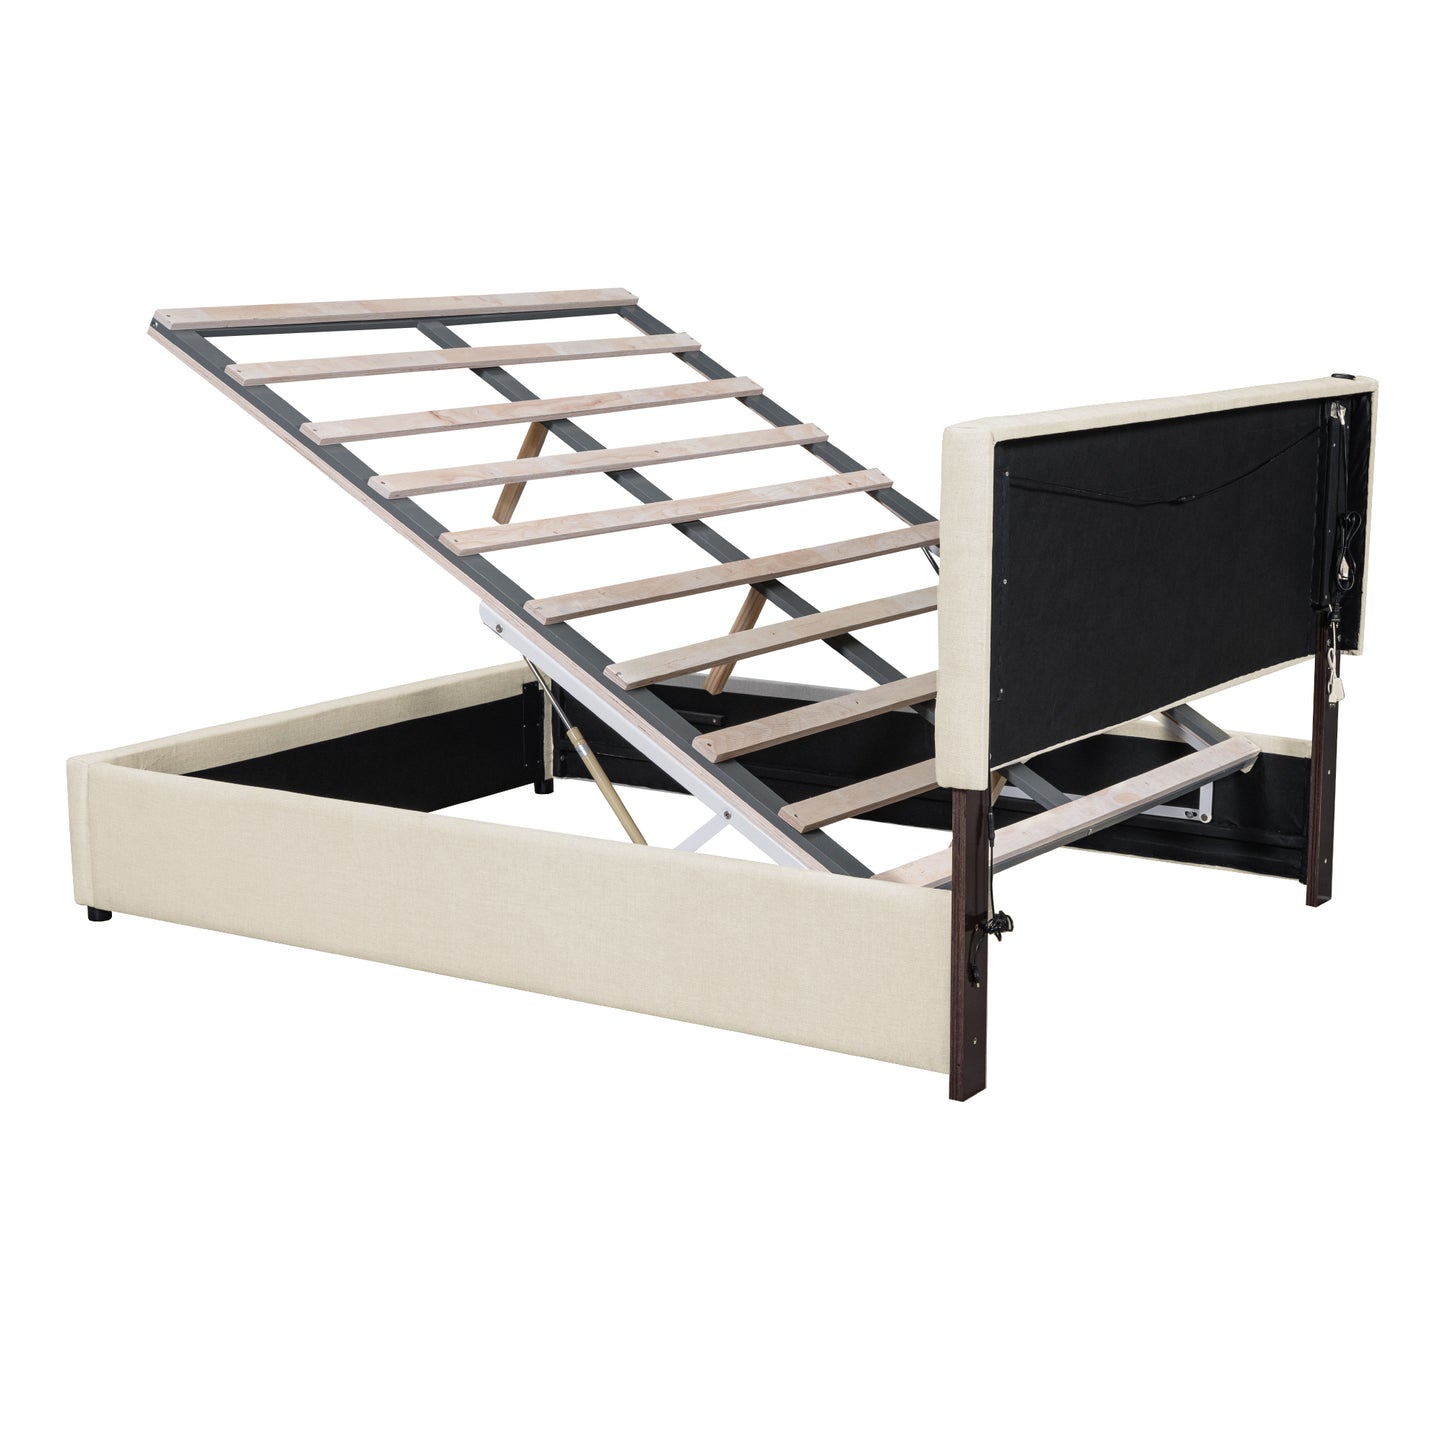 Queen Size Upholstered Platform Bed with Hydraulic Storage System and LED Light, Beige